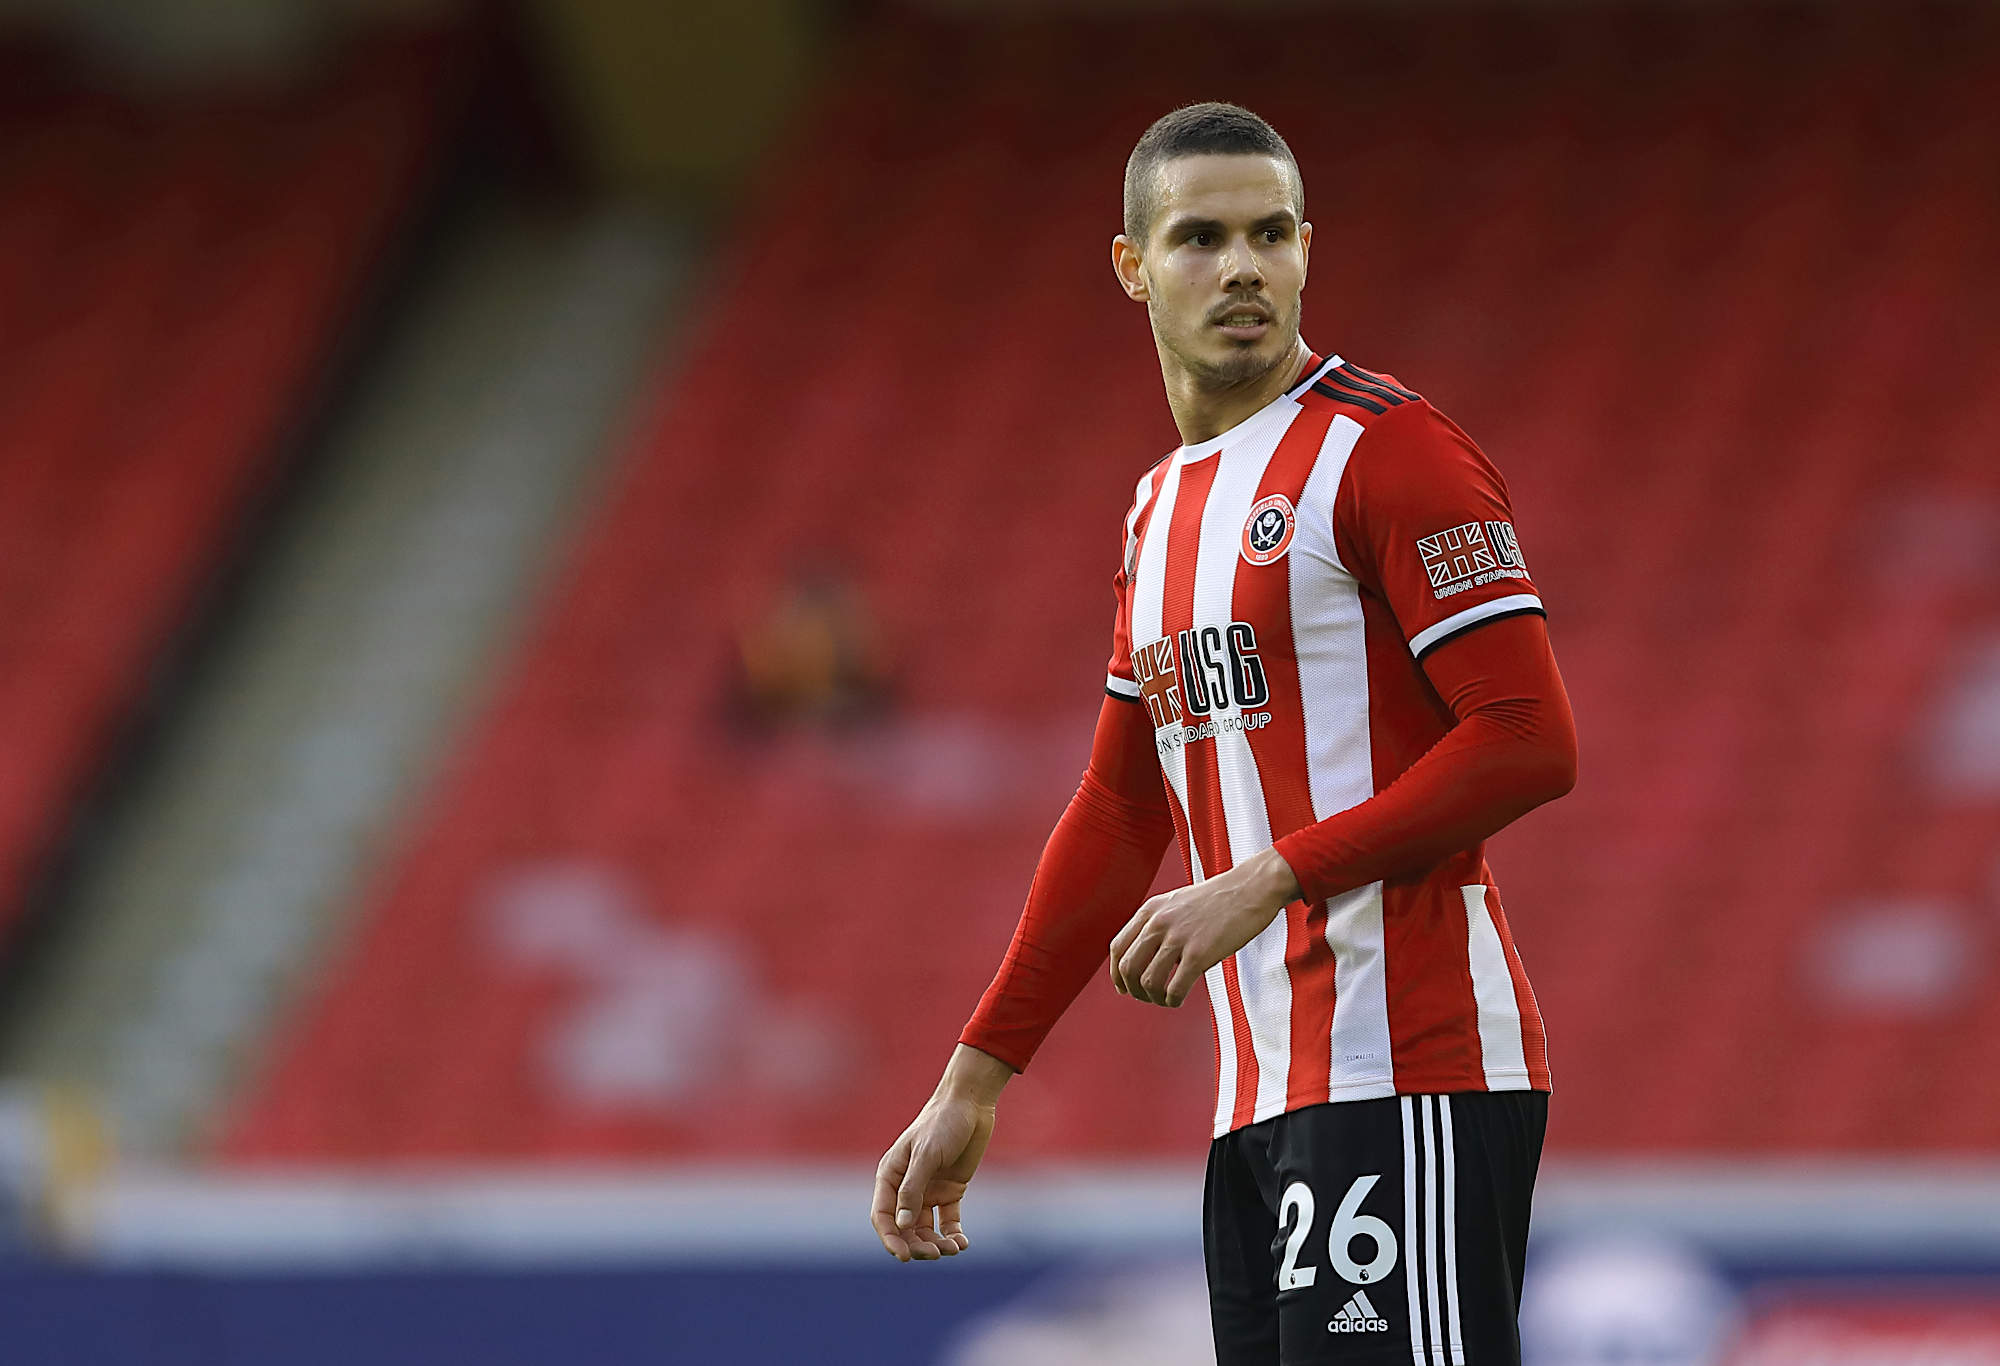 Jack Rodwell in action for Sheffield United